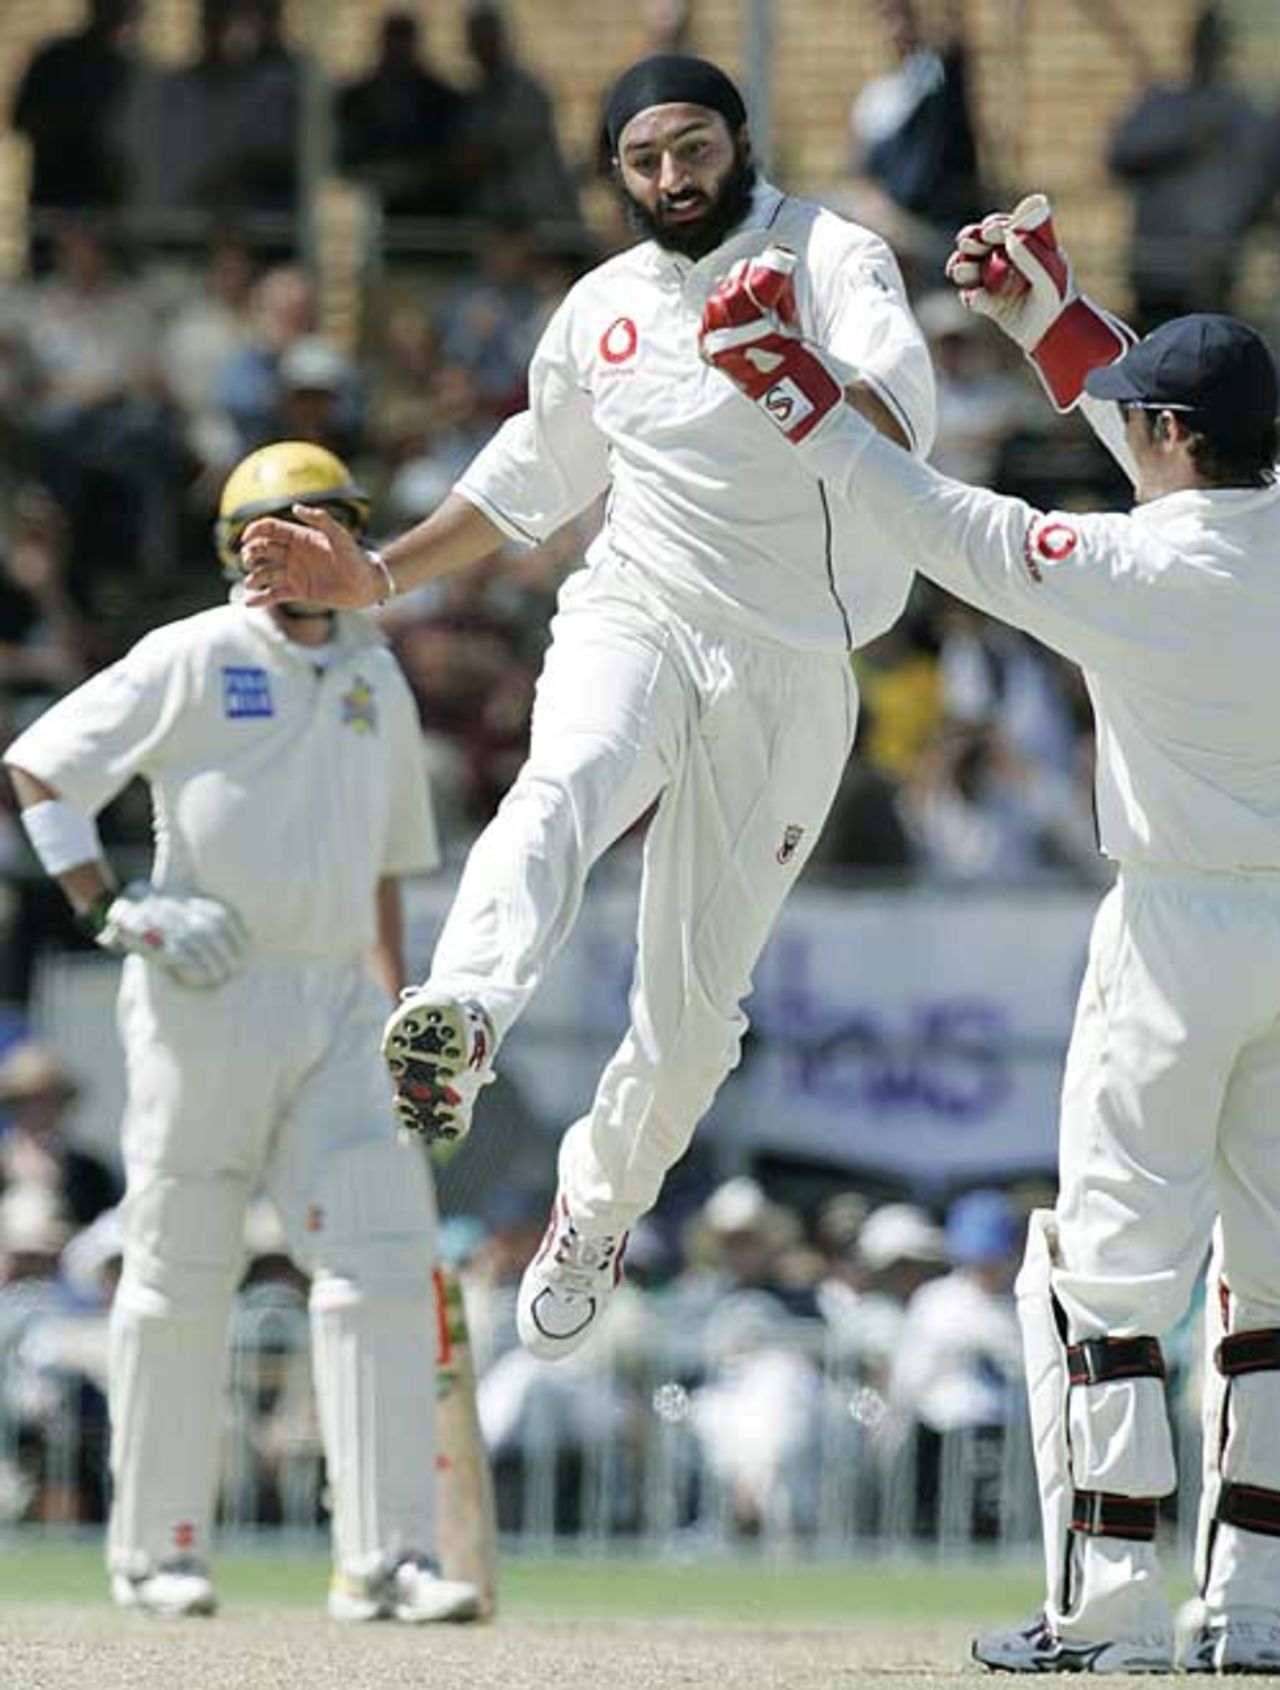 Monty Panesar performs his trademark leap after removing Luke Ronchi, Cricket Australia Chairman's XI v England XI, Lilac Hill, Perth, December 8, 2006